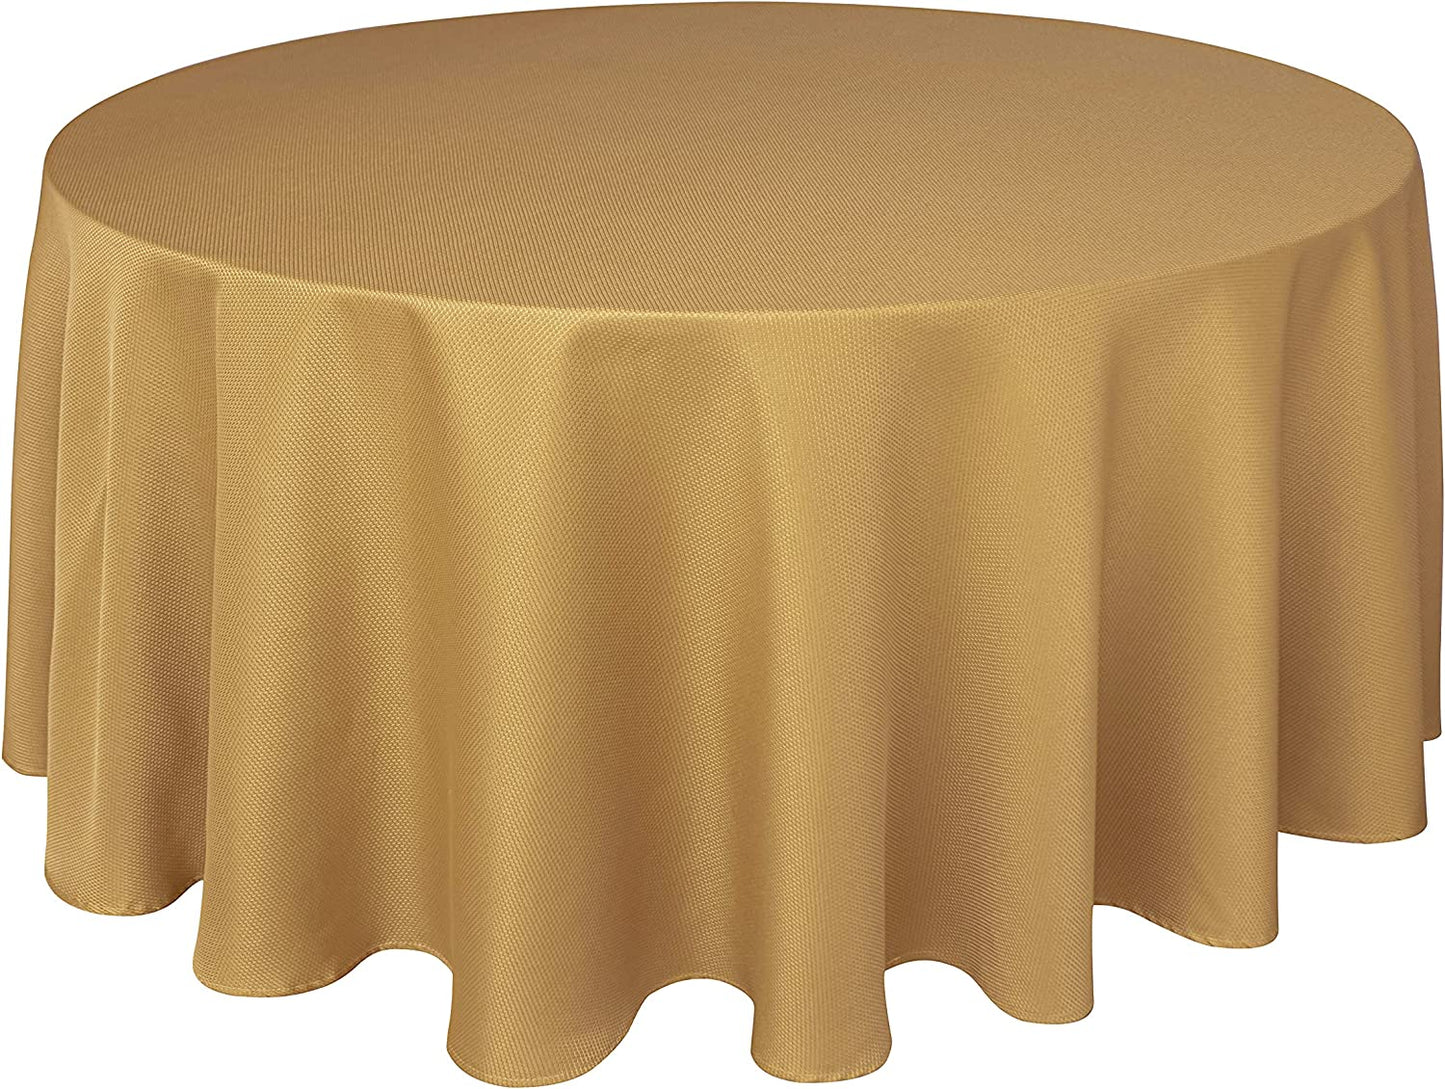 Biscaynebay Textured Fabric Round Tablecloths 108 Inches in Diameter, Gold Water Resistant